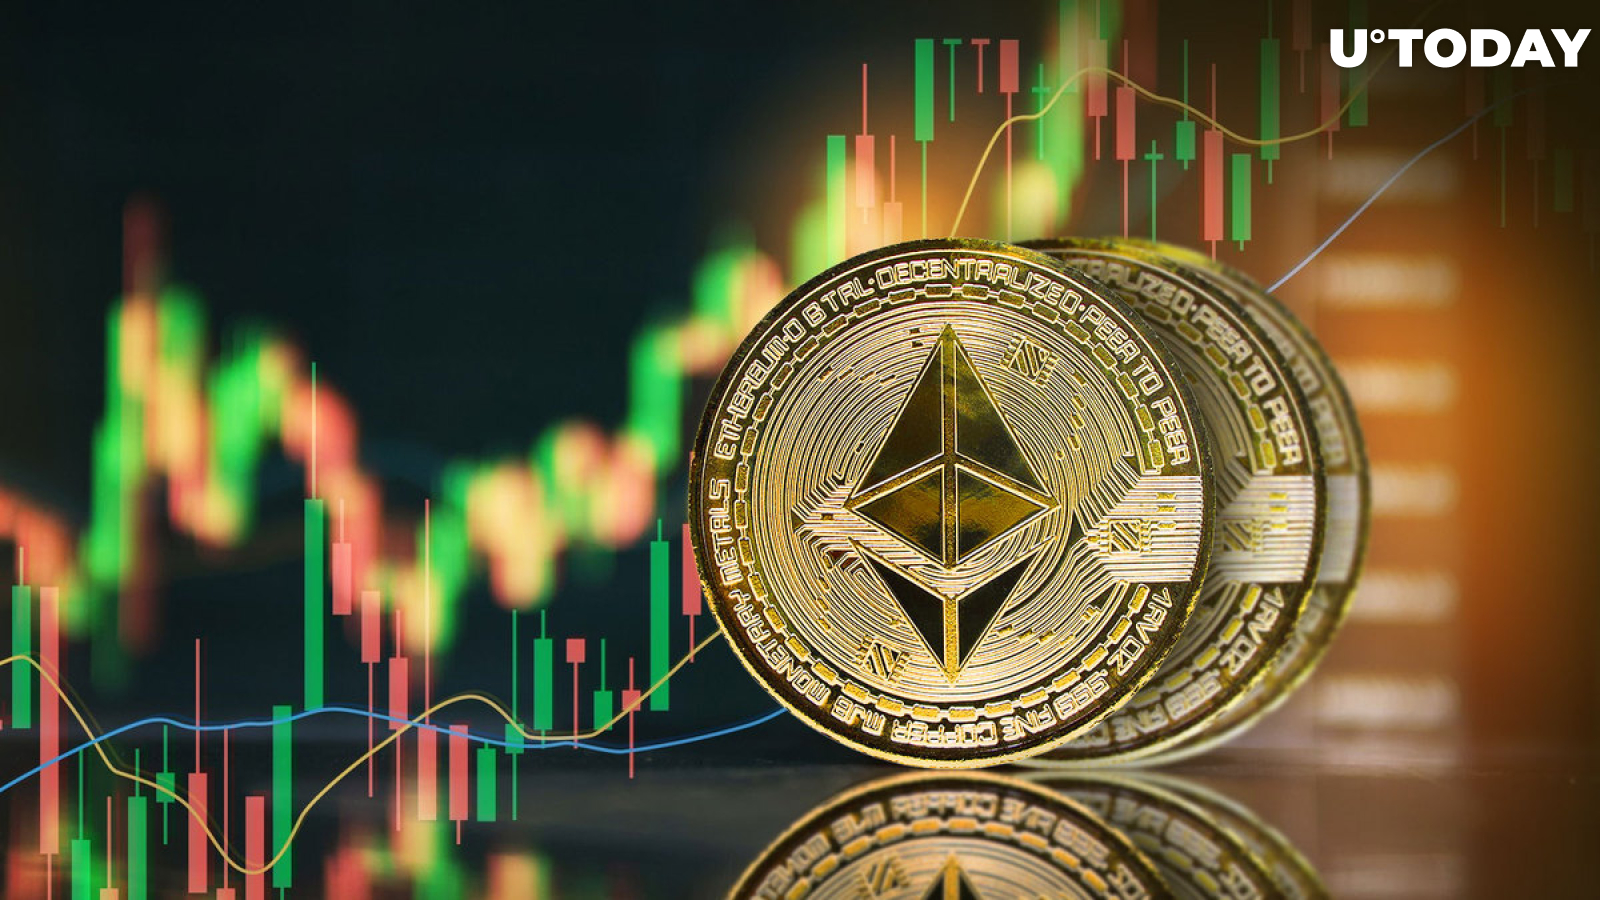 Ethereum (ETH) Price History Hints at Double Digit Gains in Q2; What to Watch